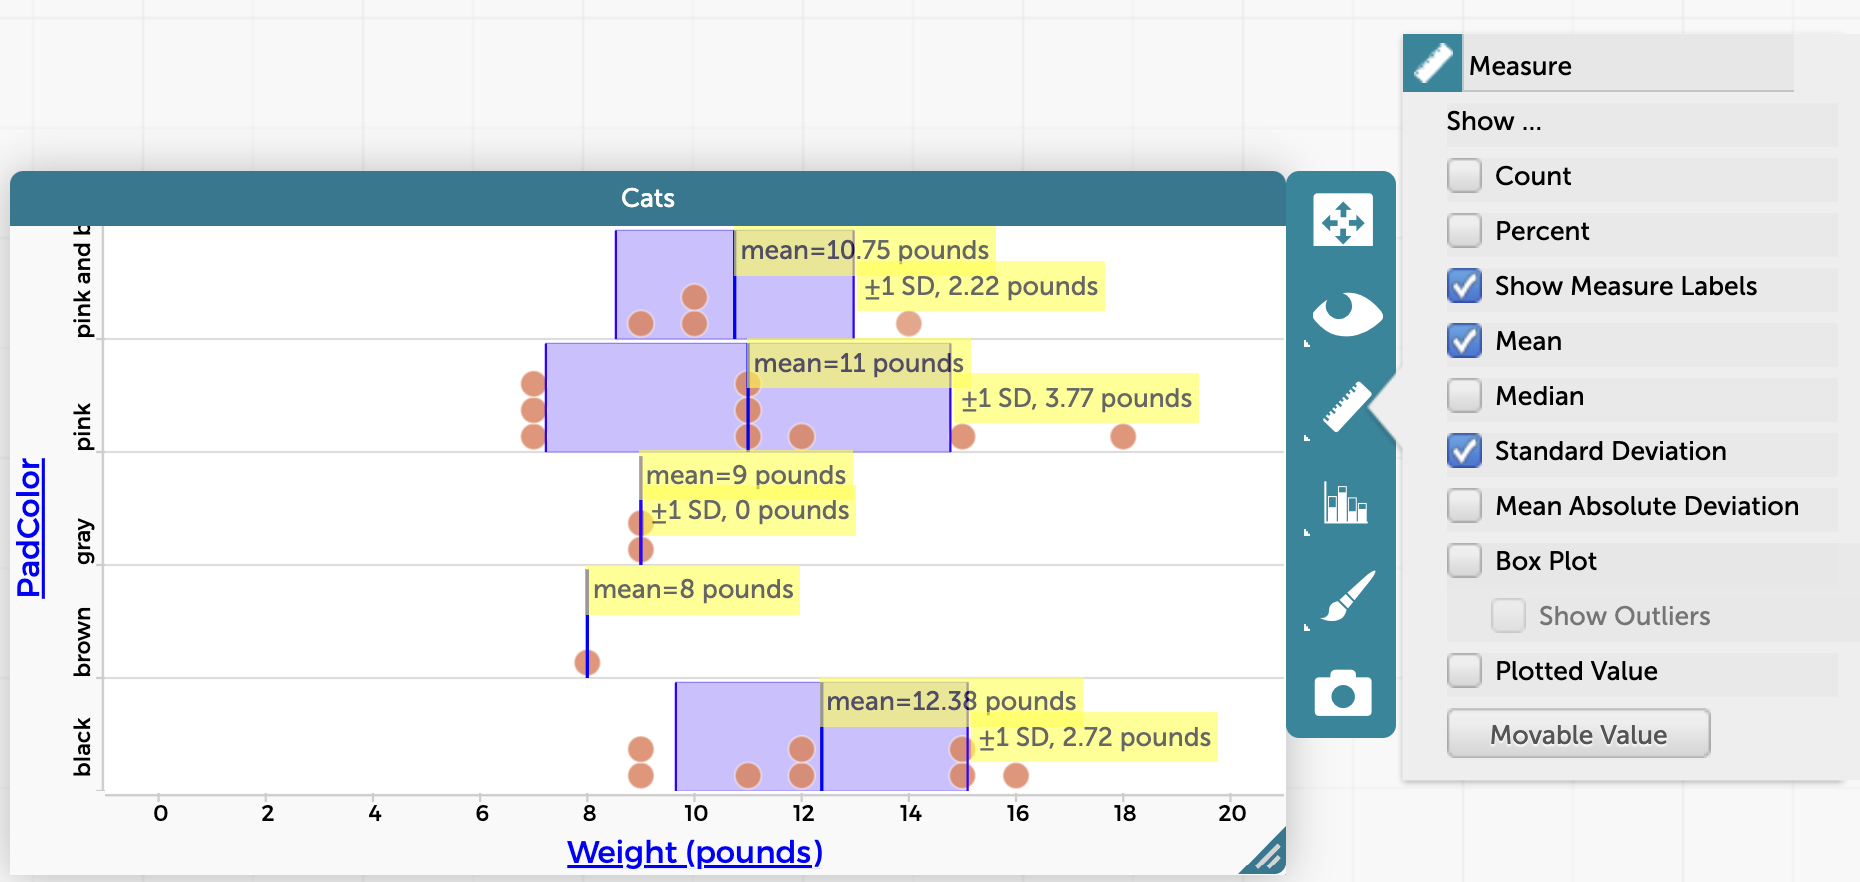 The mean, standard deviation, and measure labels are visible in this CODAP graph of cats’ weights vs. the color of the pads on their paws.